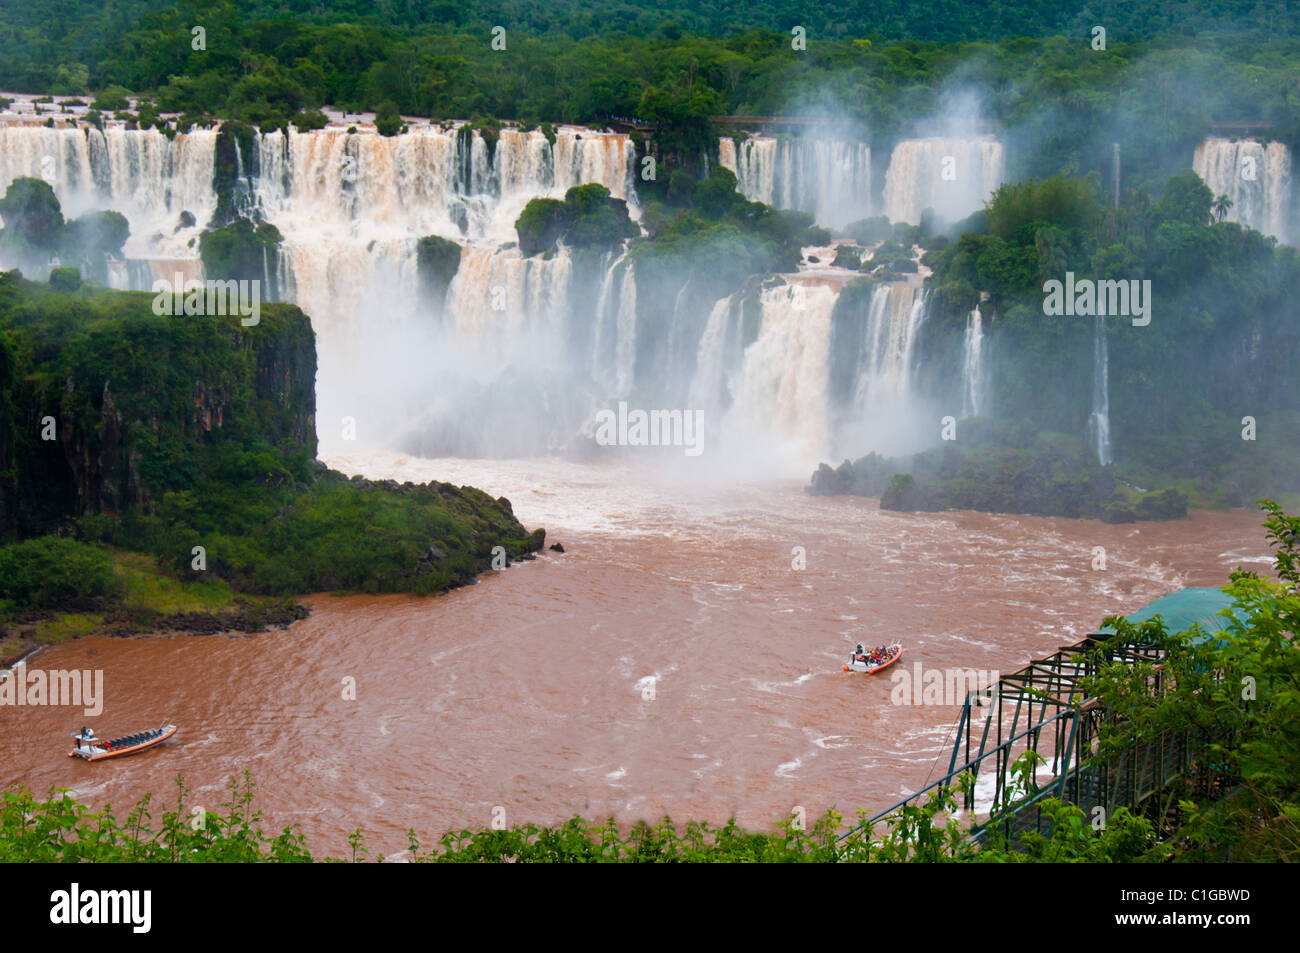 Tourists view Iguazu Falls, one of the world's most famous natural wonders, located at the border of Brazil and Argentina. Stock Photo